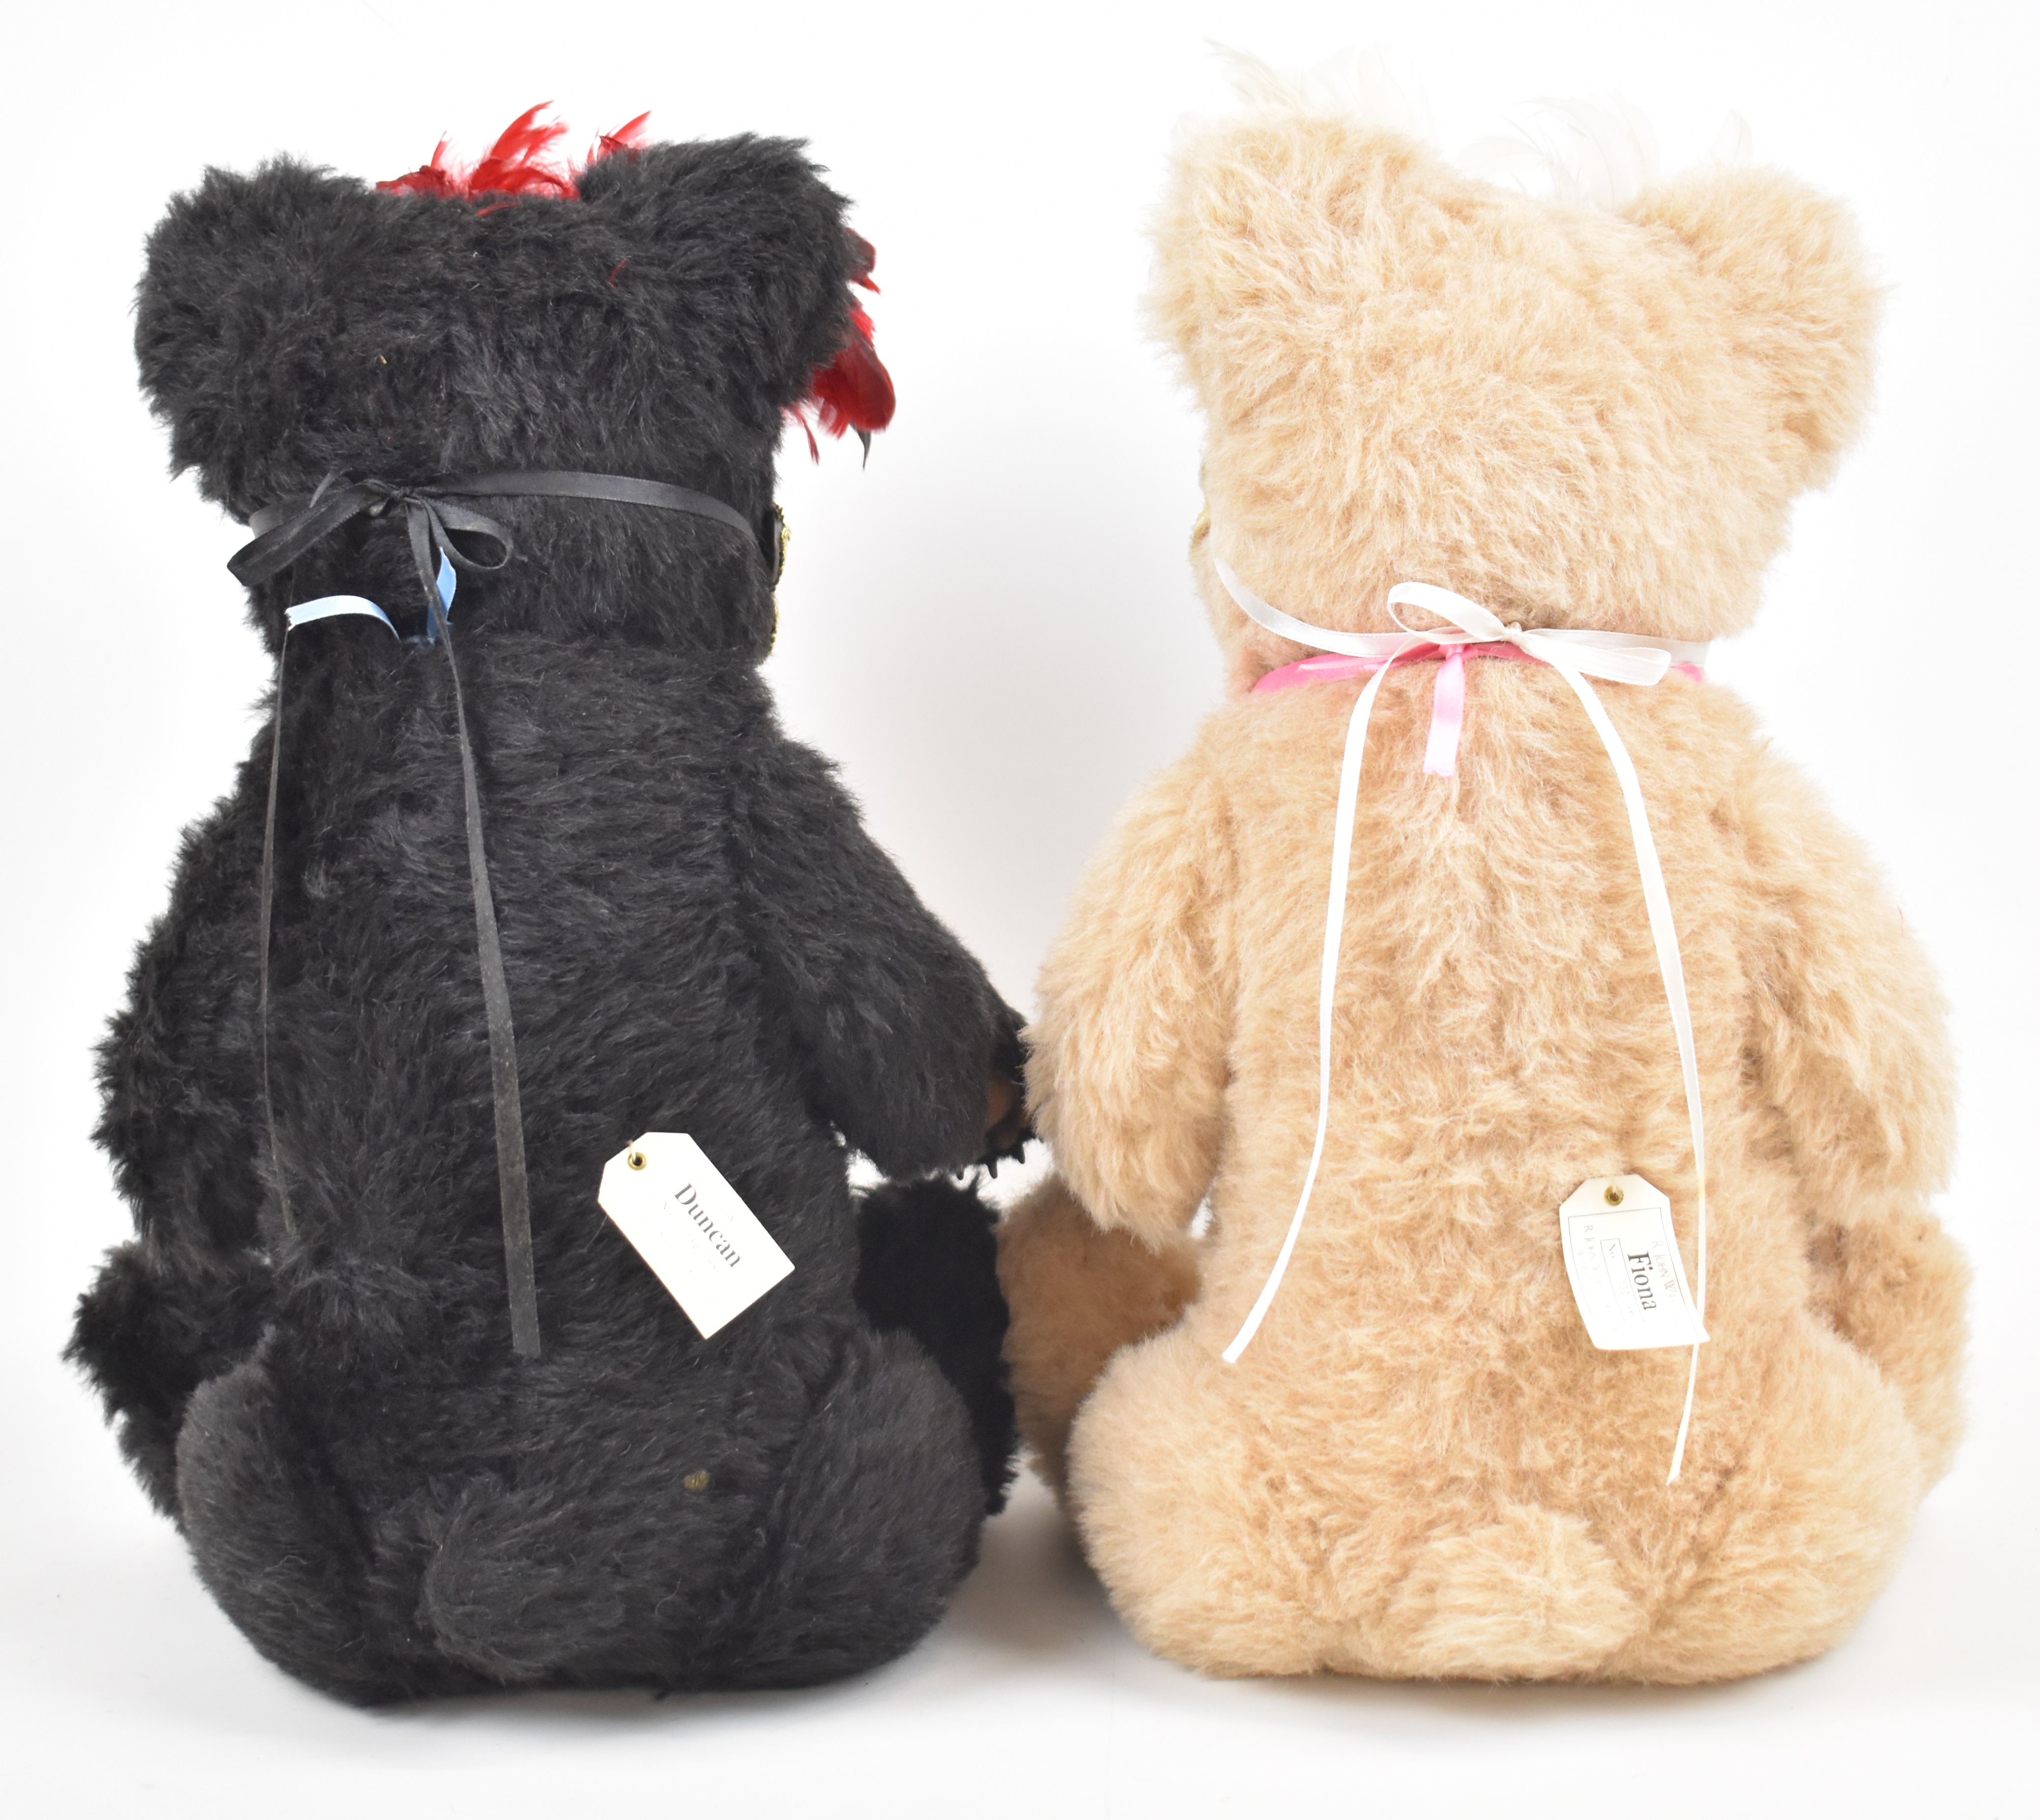 Two R. John Wright limited edition Teddy bears Duncan and Fiona, each with original tags and - Image 2 of 4